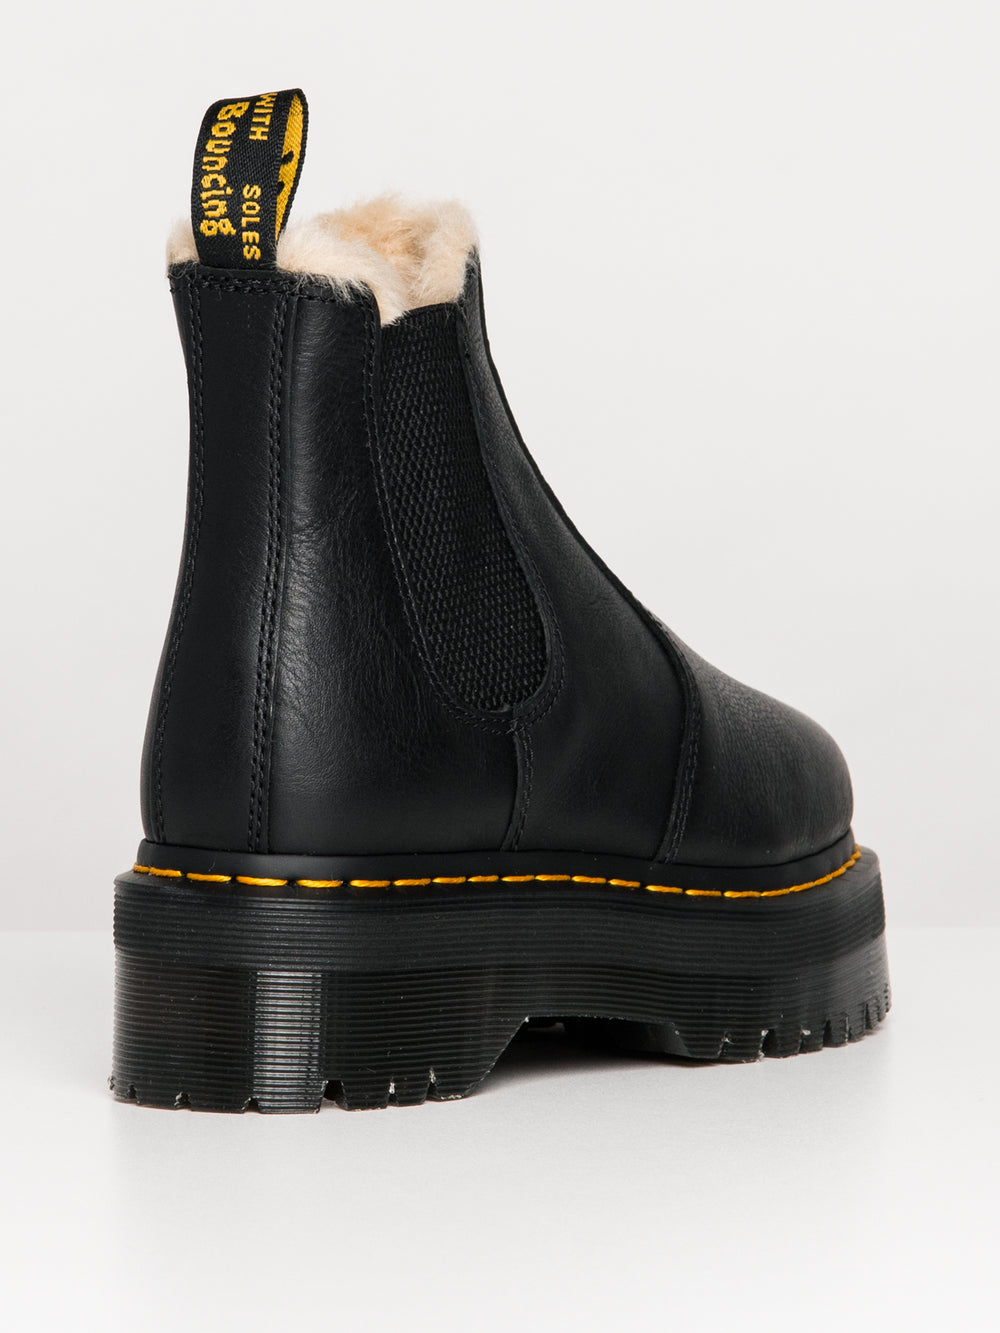 WOMENS DR MARTENS 2976 QUAD FUR LINED BOOT - CLEARANCE